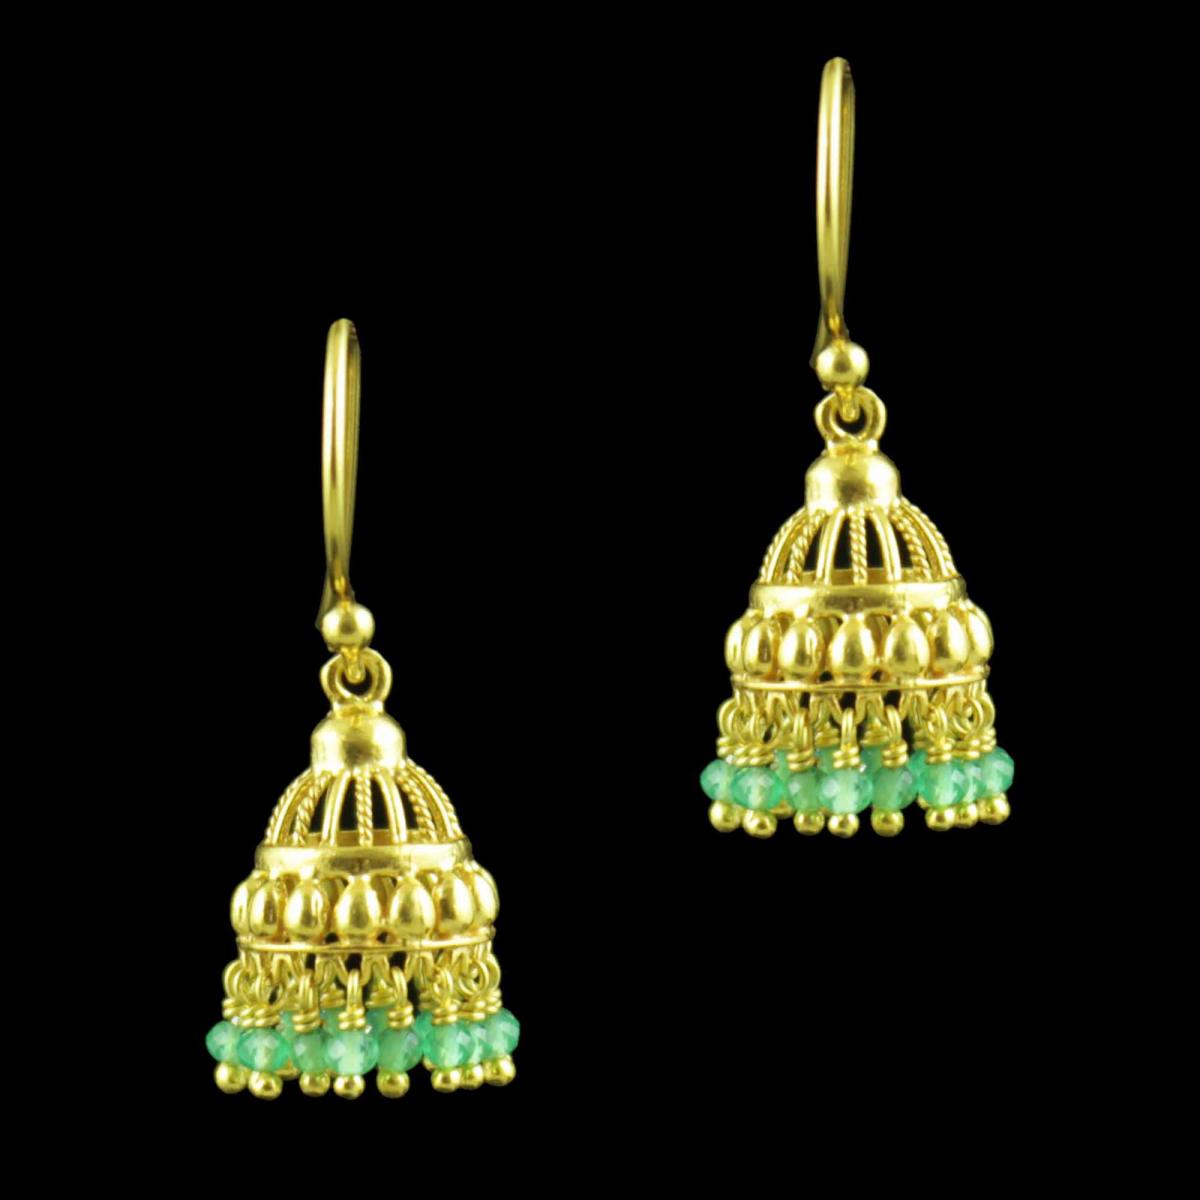 GOLD PLATED HANGING JHUMKA EARRINGS WITH JADE BEADS